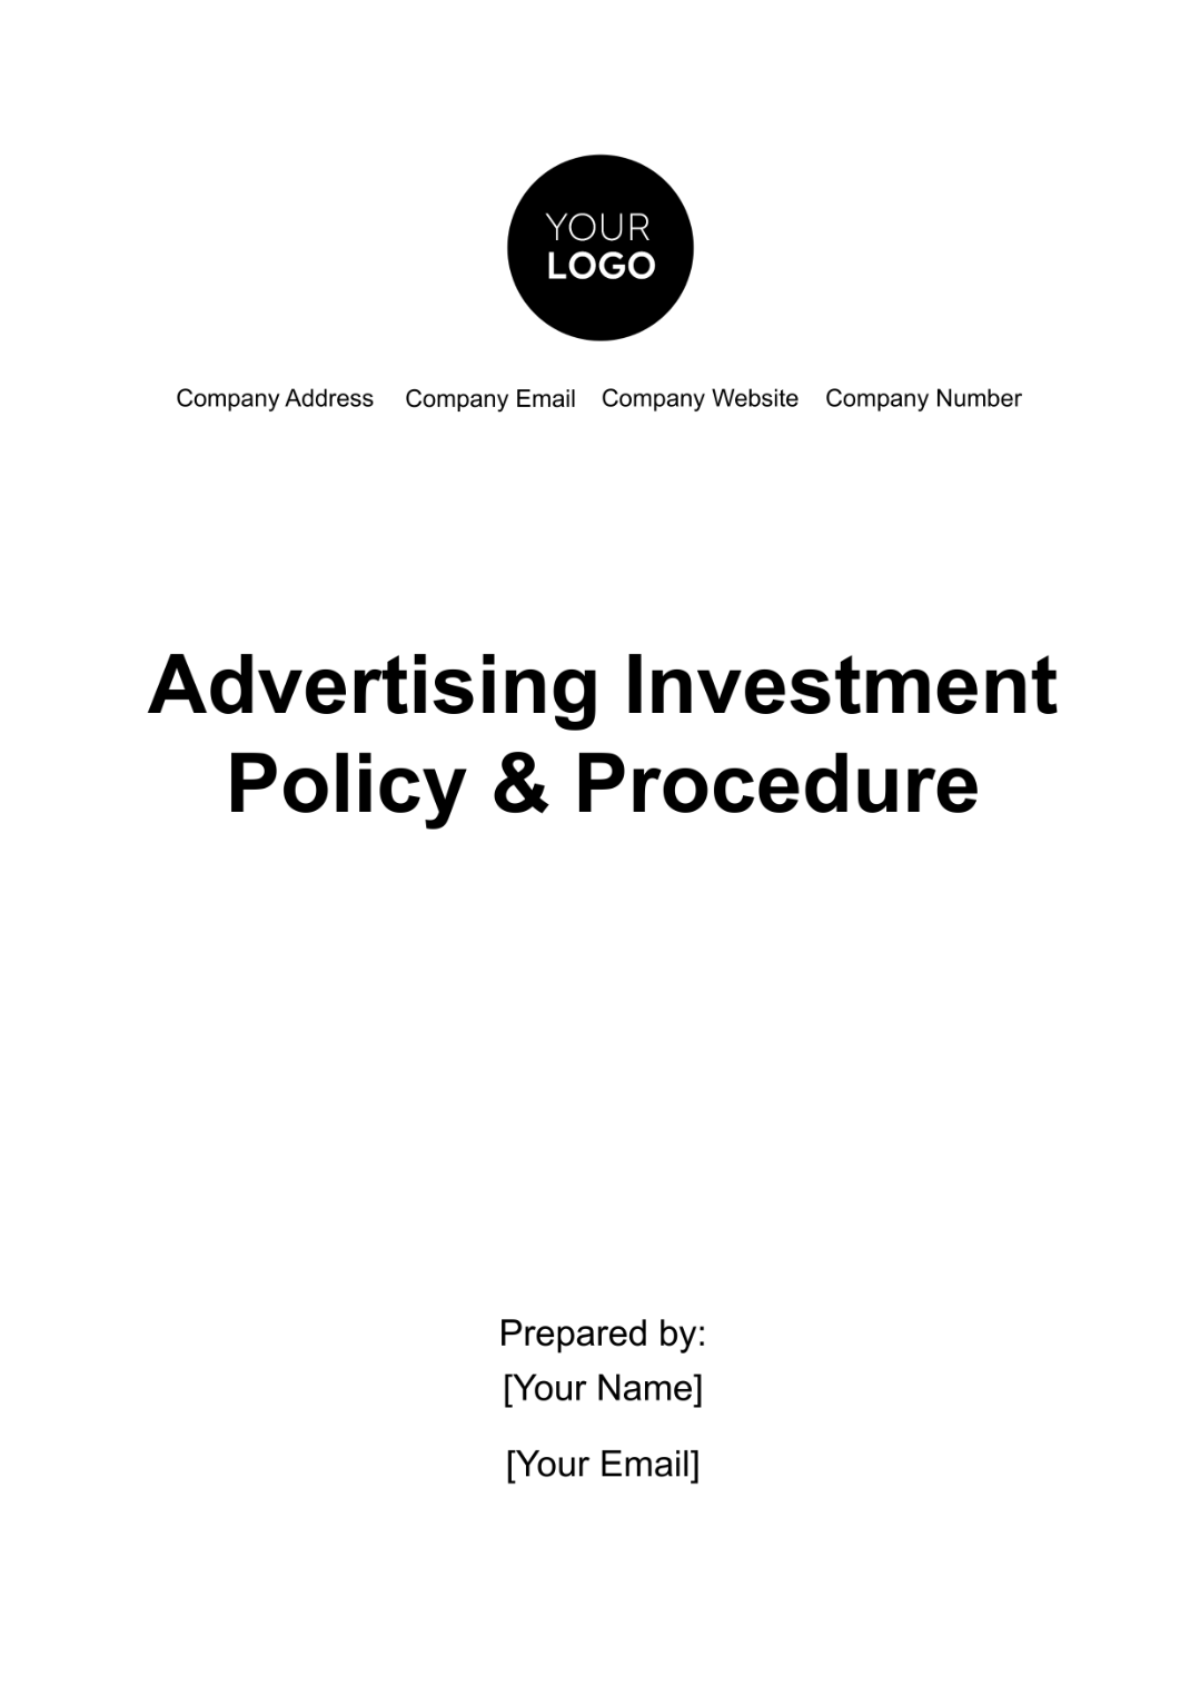 Free Advertising Investment Policy & Procedure Template